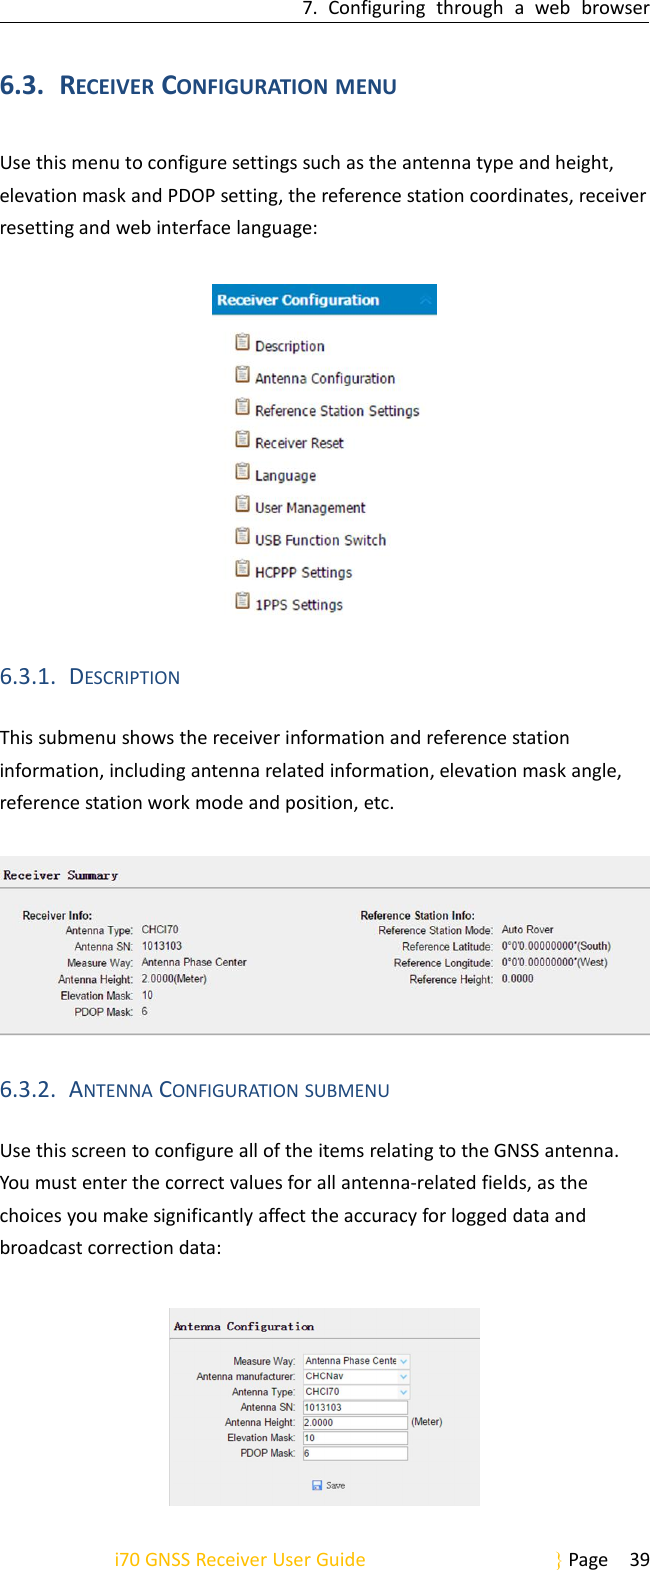 7. Configuring through a web browseri70 GNSS Receiver User Guide Page 396.3. RECEIVER CONFIGURATION MENUUse this menu to configure settings such as the antenna type and height,elevation mask and PDOP setting, the reference station coordinates, receiverresetting and web interface language:6.3.1. DESCRIPTIONThis submenu shows the receiver information and reference stationinformation, including antenna related information, elevation mask angle,reference station work mode and position, etc.6.3.2. ANTENNA CONFIGURATION SUBMENUUse this screen to configure all of the items relating to the GNSS antenna.You must enter the correct values for all antenna-related fields, as thechoices you make significantly affect the accuracy for logged data andbroadcast correction data: